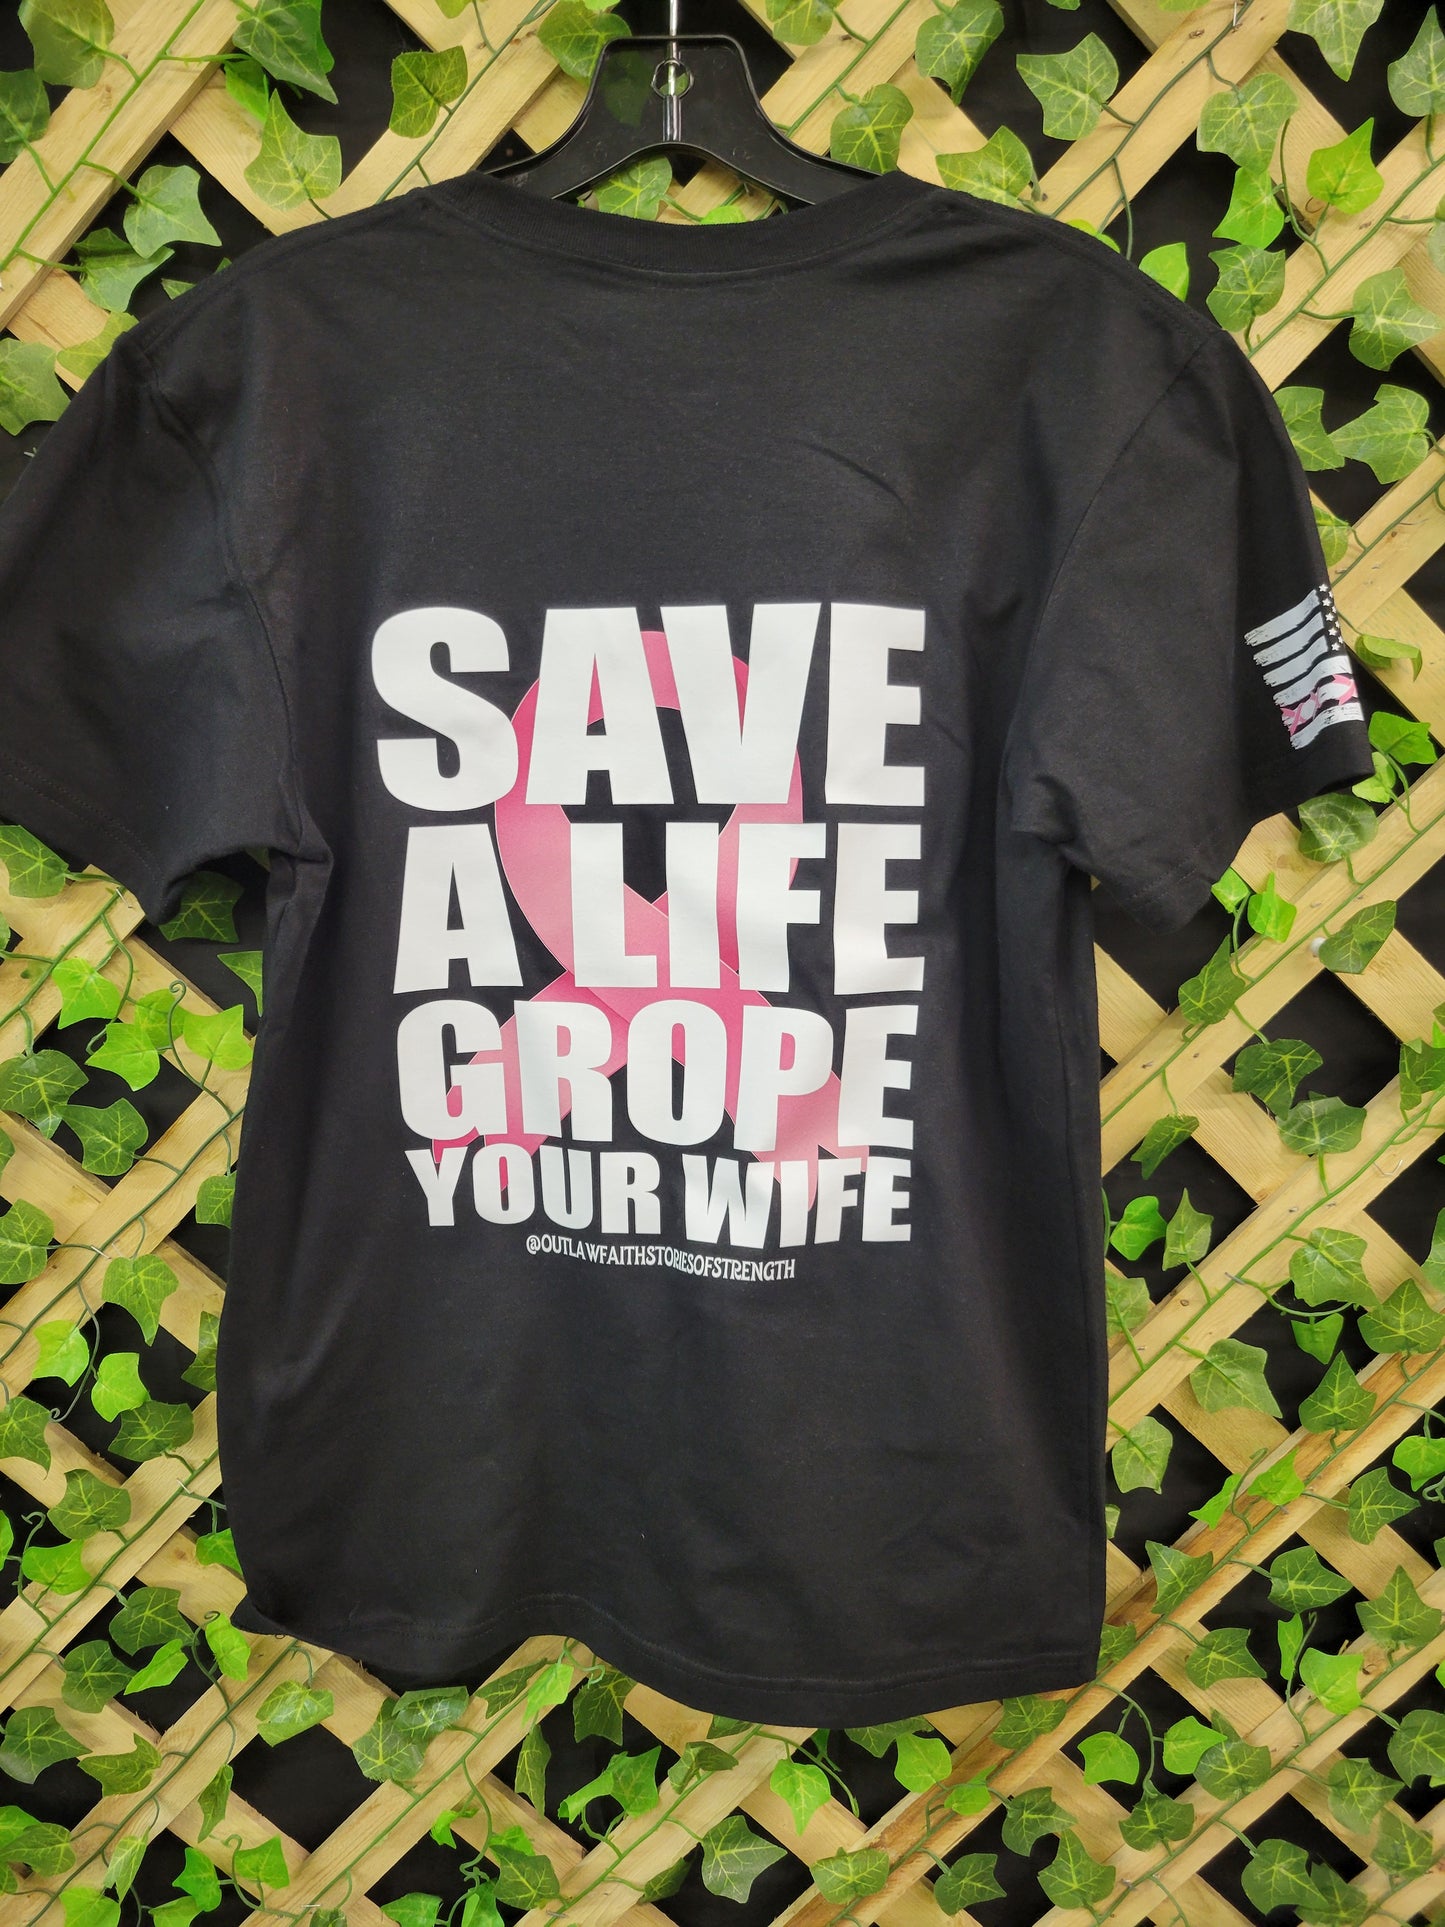 'Save A Life Grope Your Wife' T-shirt